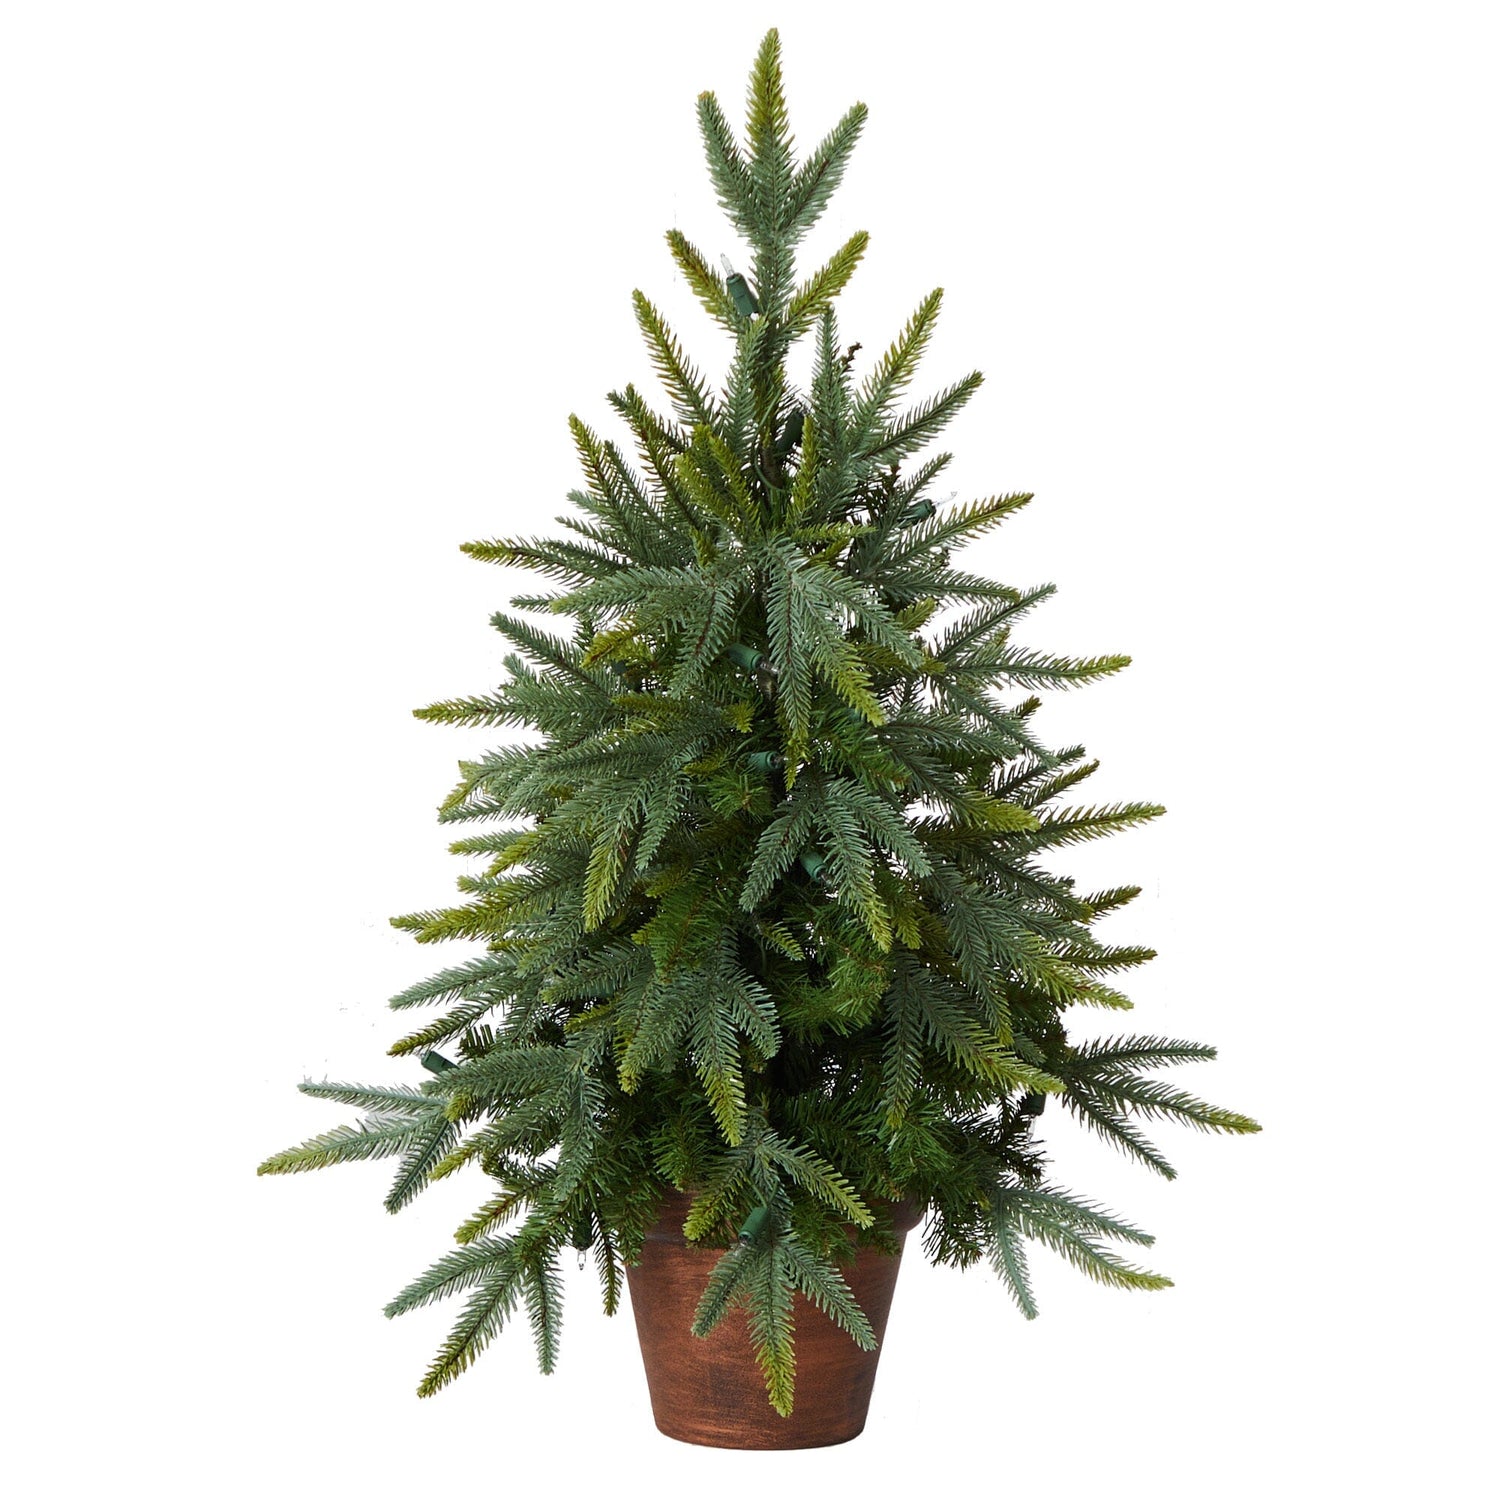 2.5' Pre-Lit Artificial Christmas Tree with 50 Clear Lights in Decorative Planter